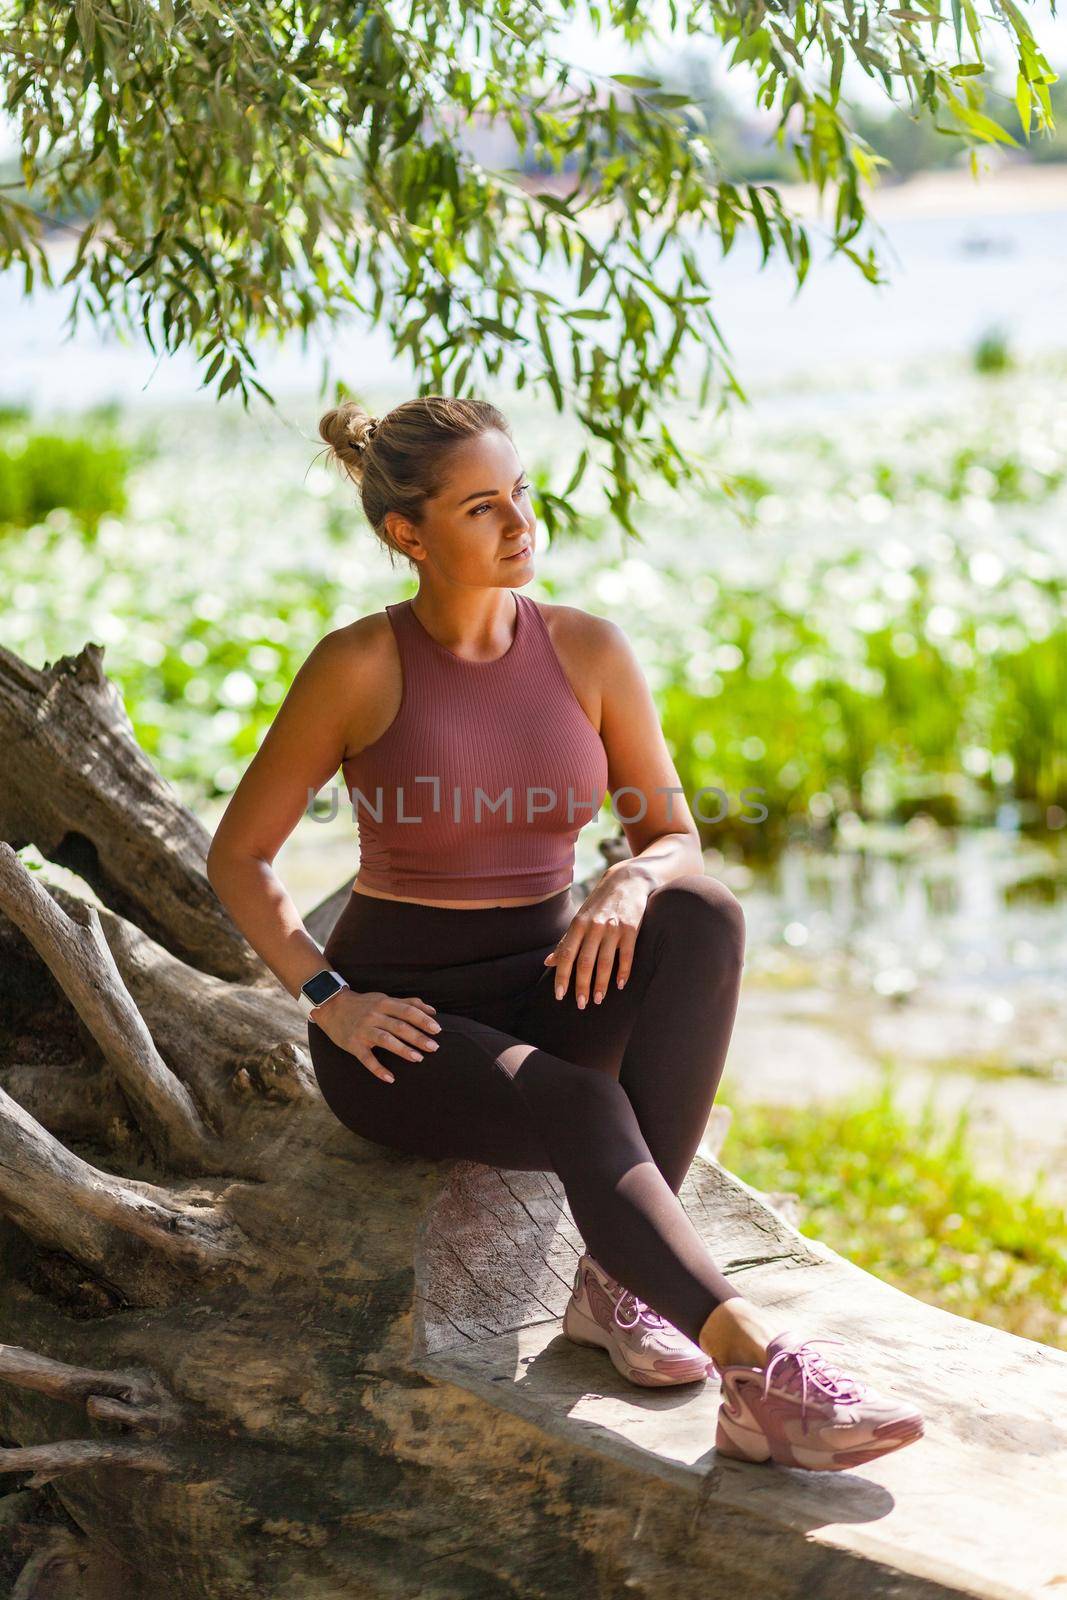 Sexy sportive woman in tight yoga pants and top sitting in forest taking rest after jogging, looking away with pensive serious concentrated expression. Relaxation after workouts outdoor summer day